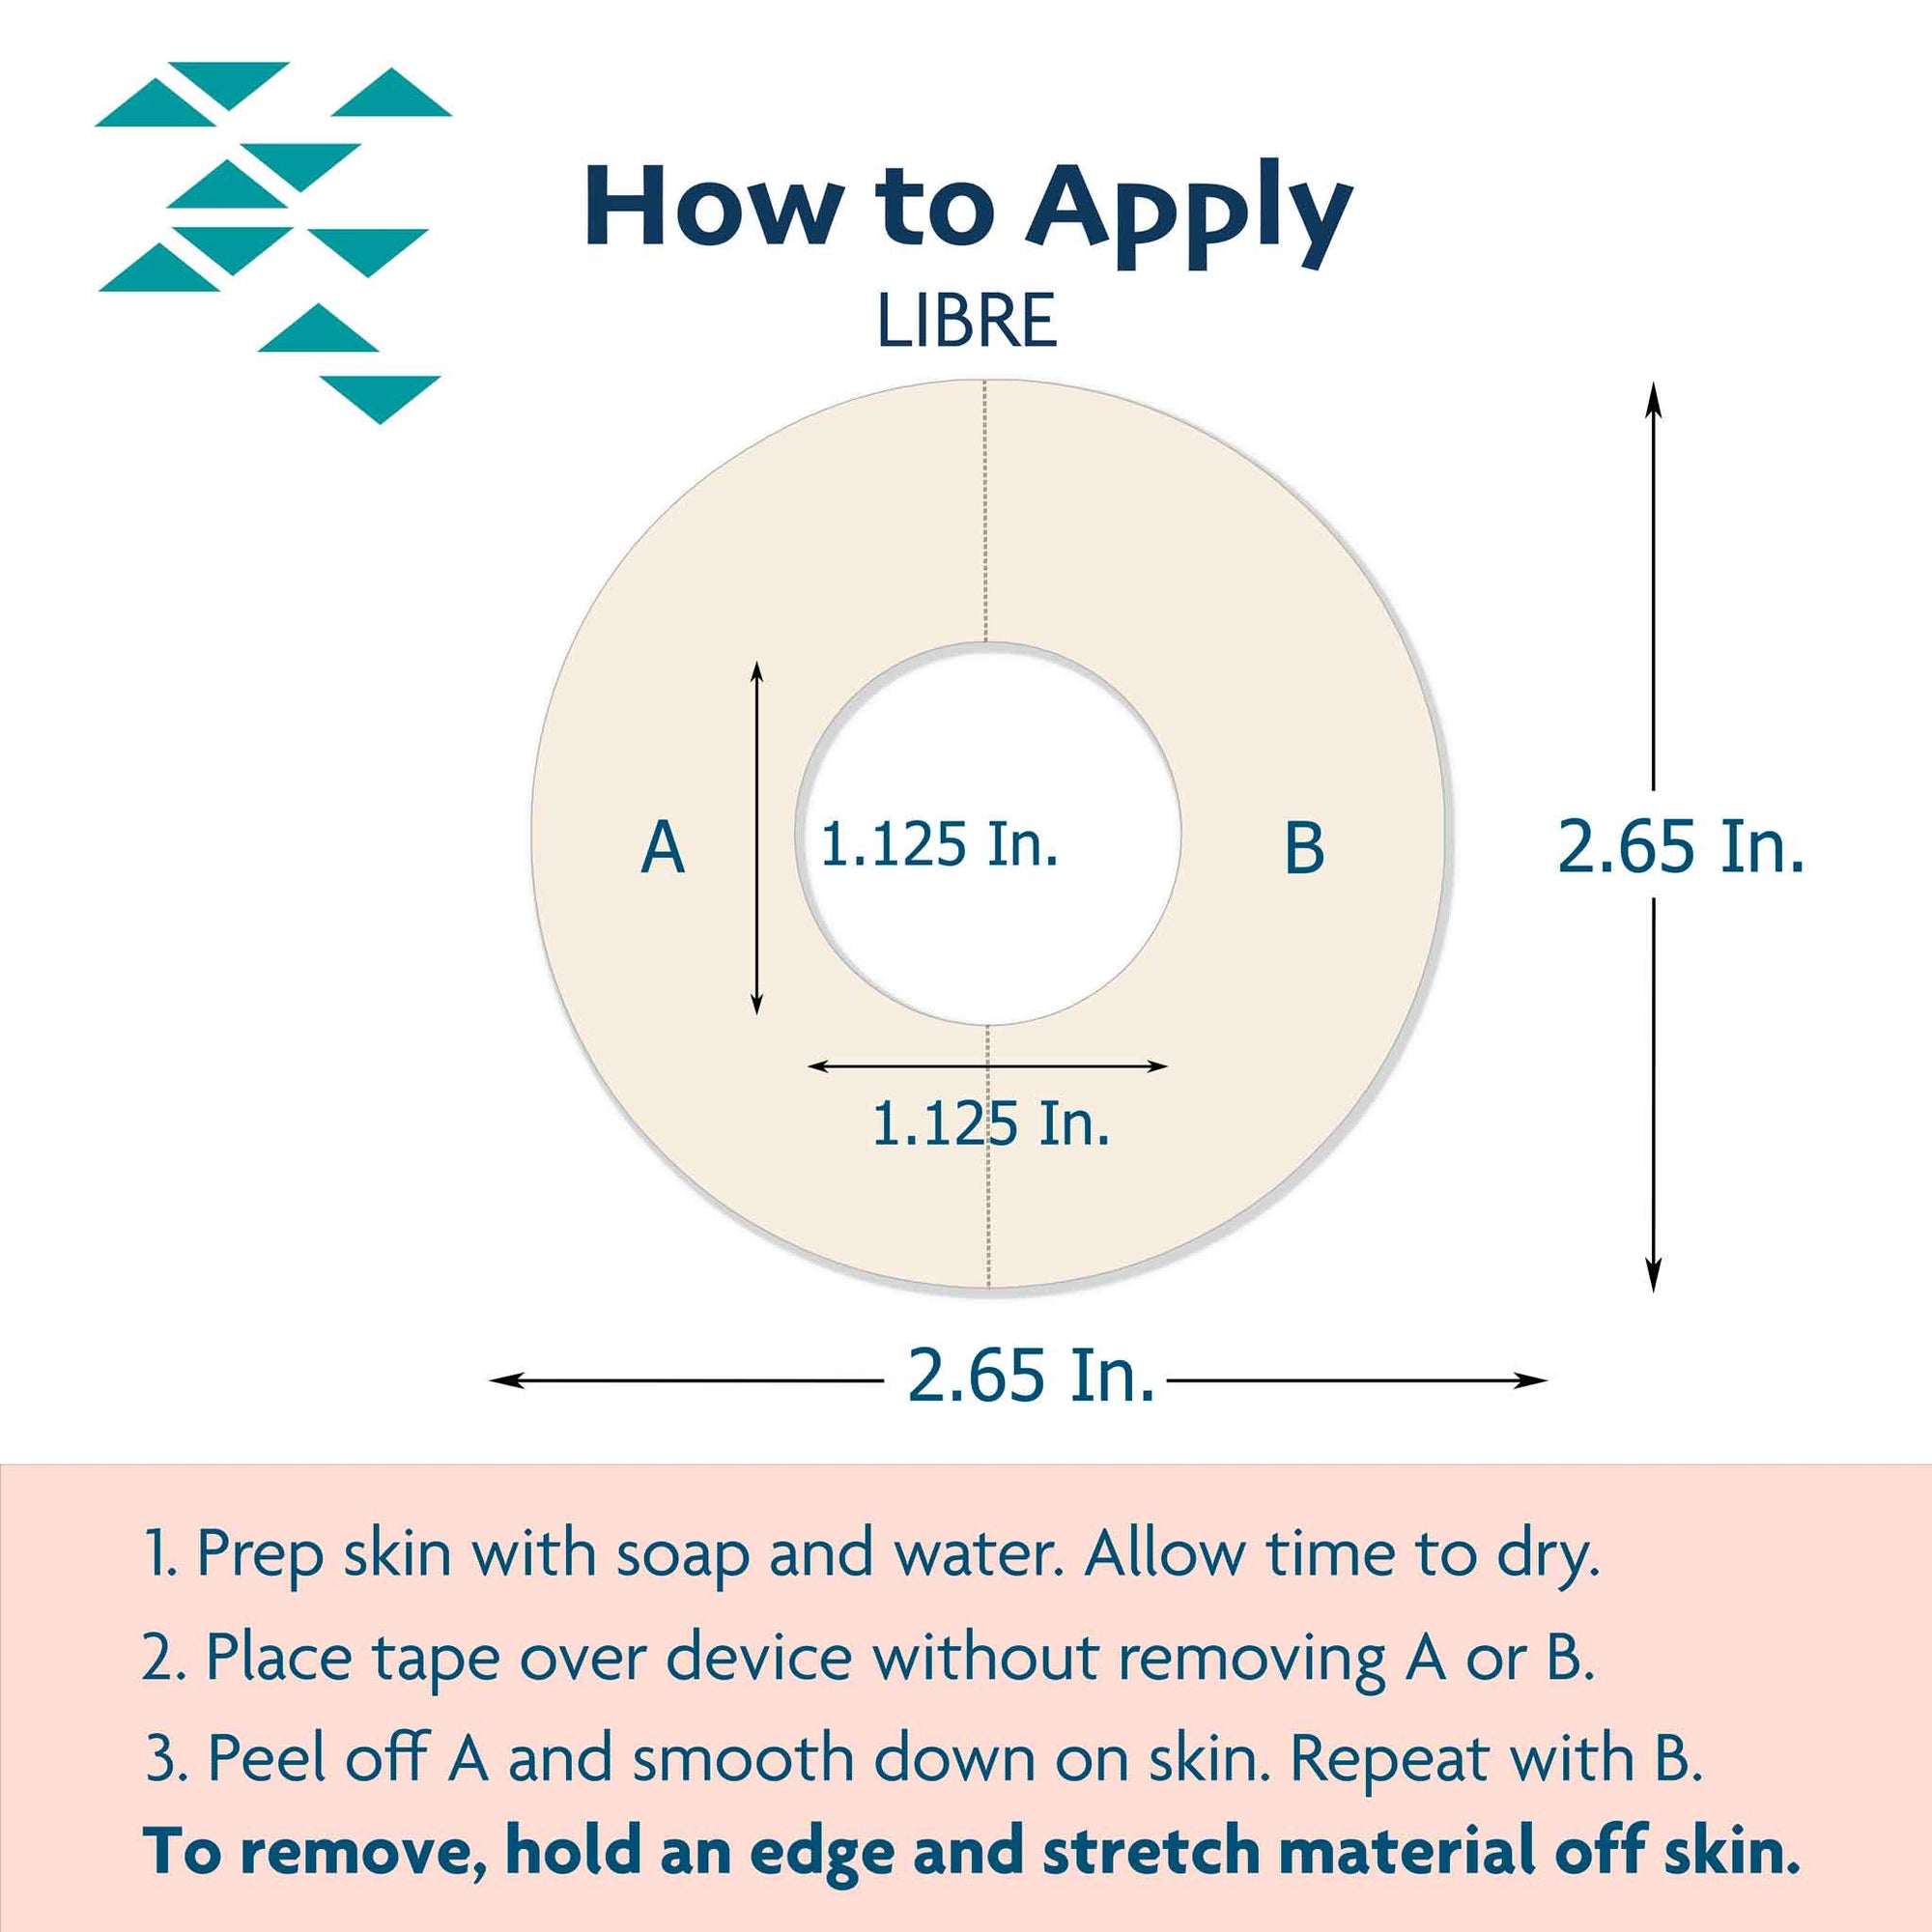 ExpressionMed Guide for covering libre CGM properly, Abbott Lingo